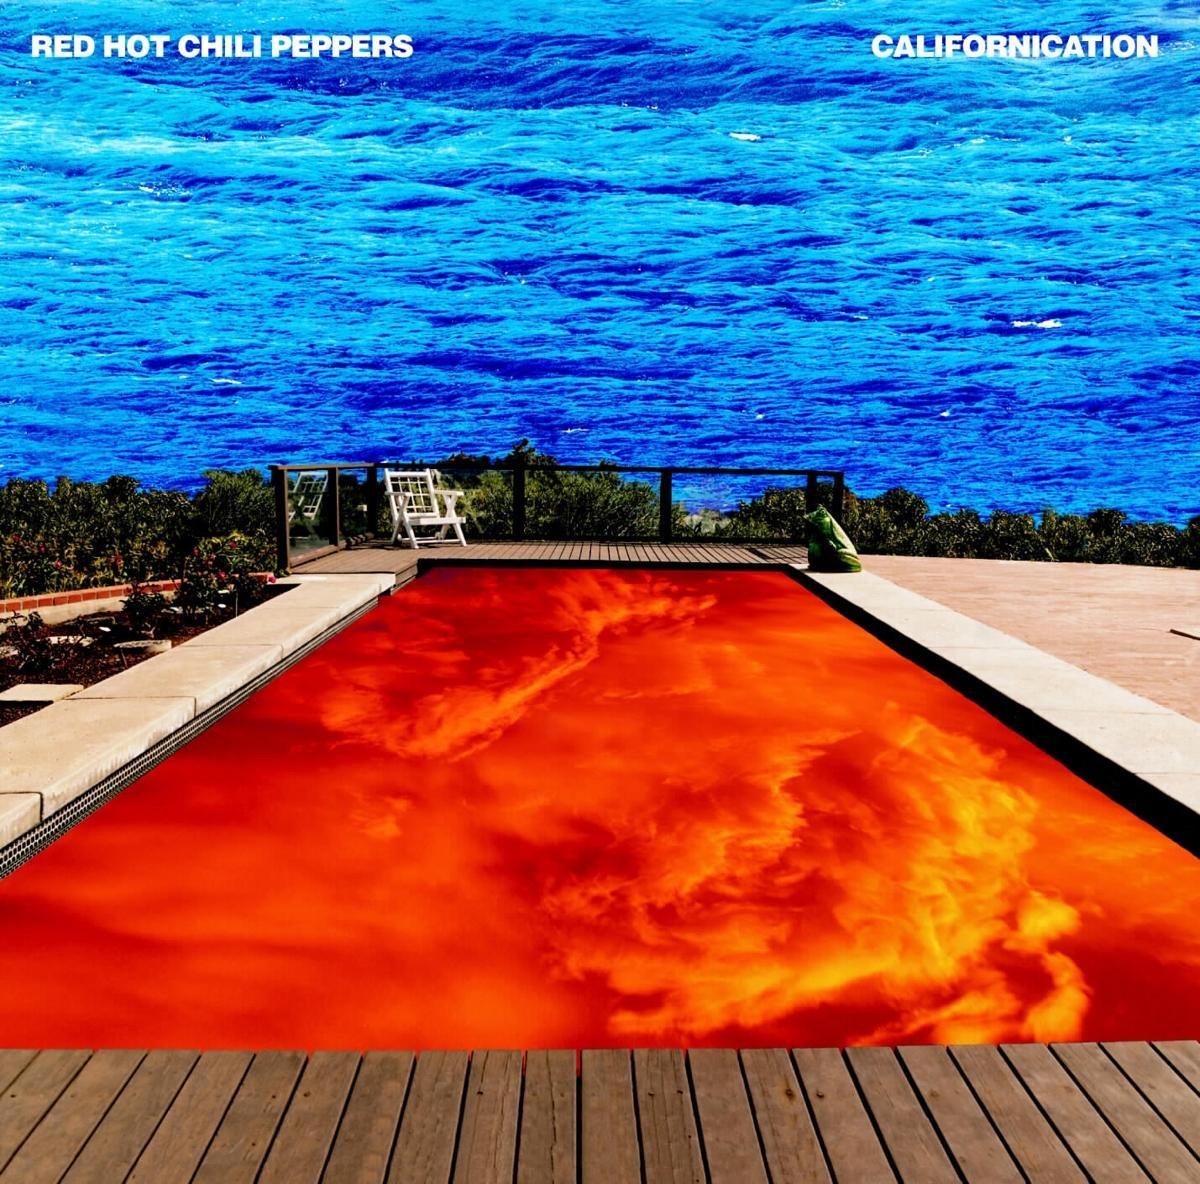 Californication (LP) - Red Hot Chili Peppers